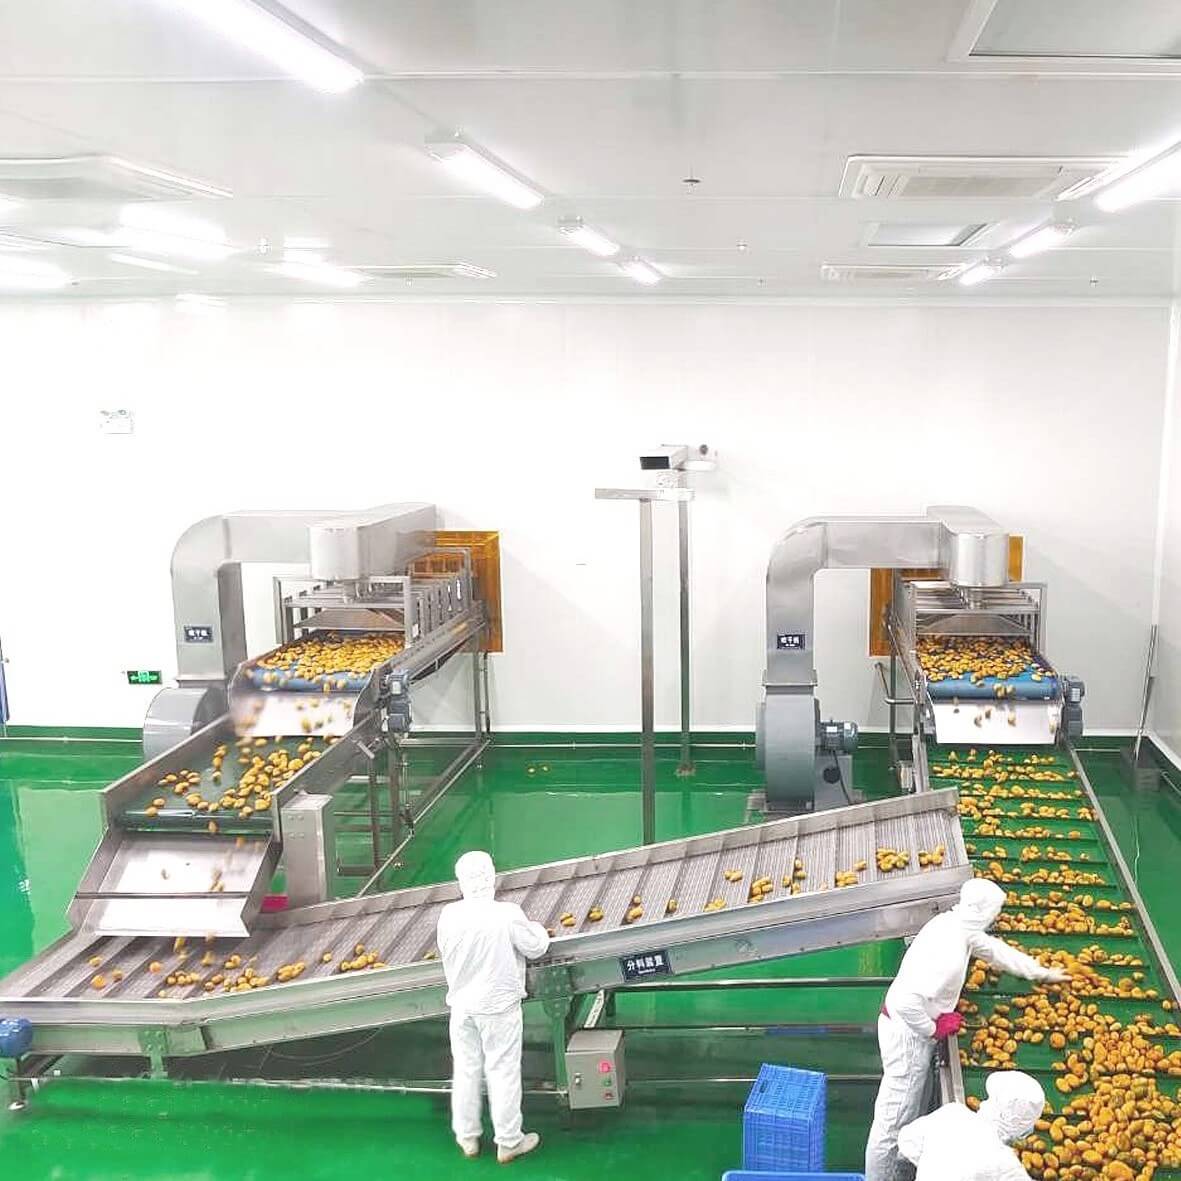 pineapple processing line